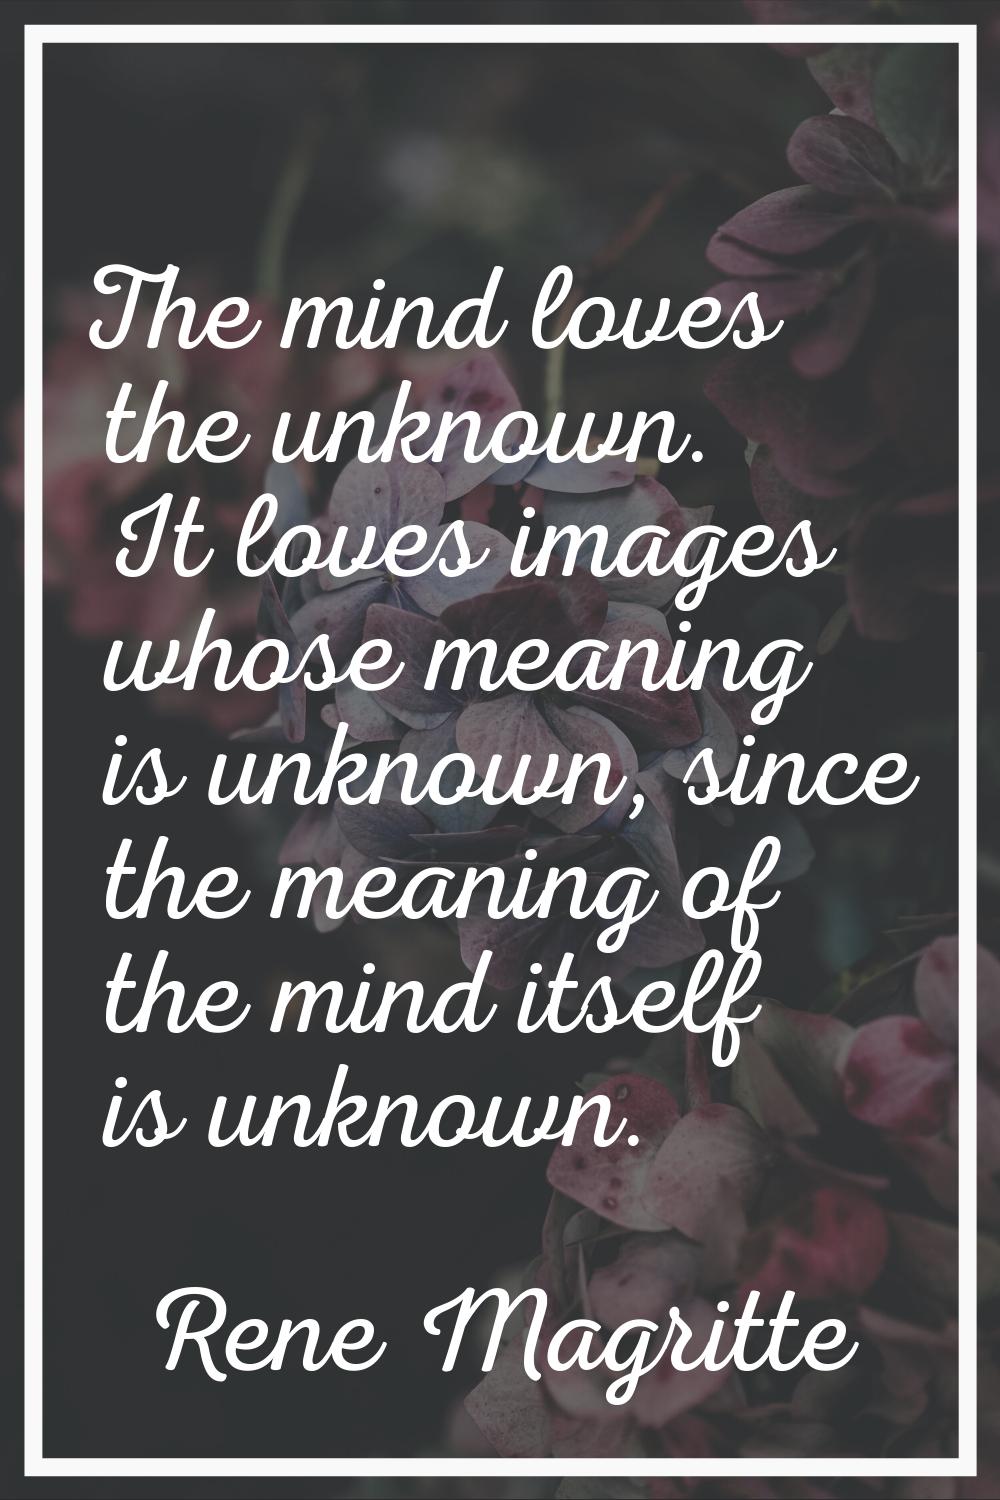 The mind loves the unknown. It loves images whose meaning is unknown, since the meaning of the mind